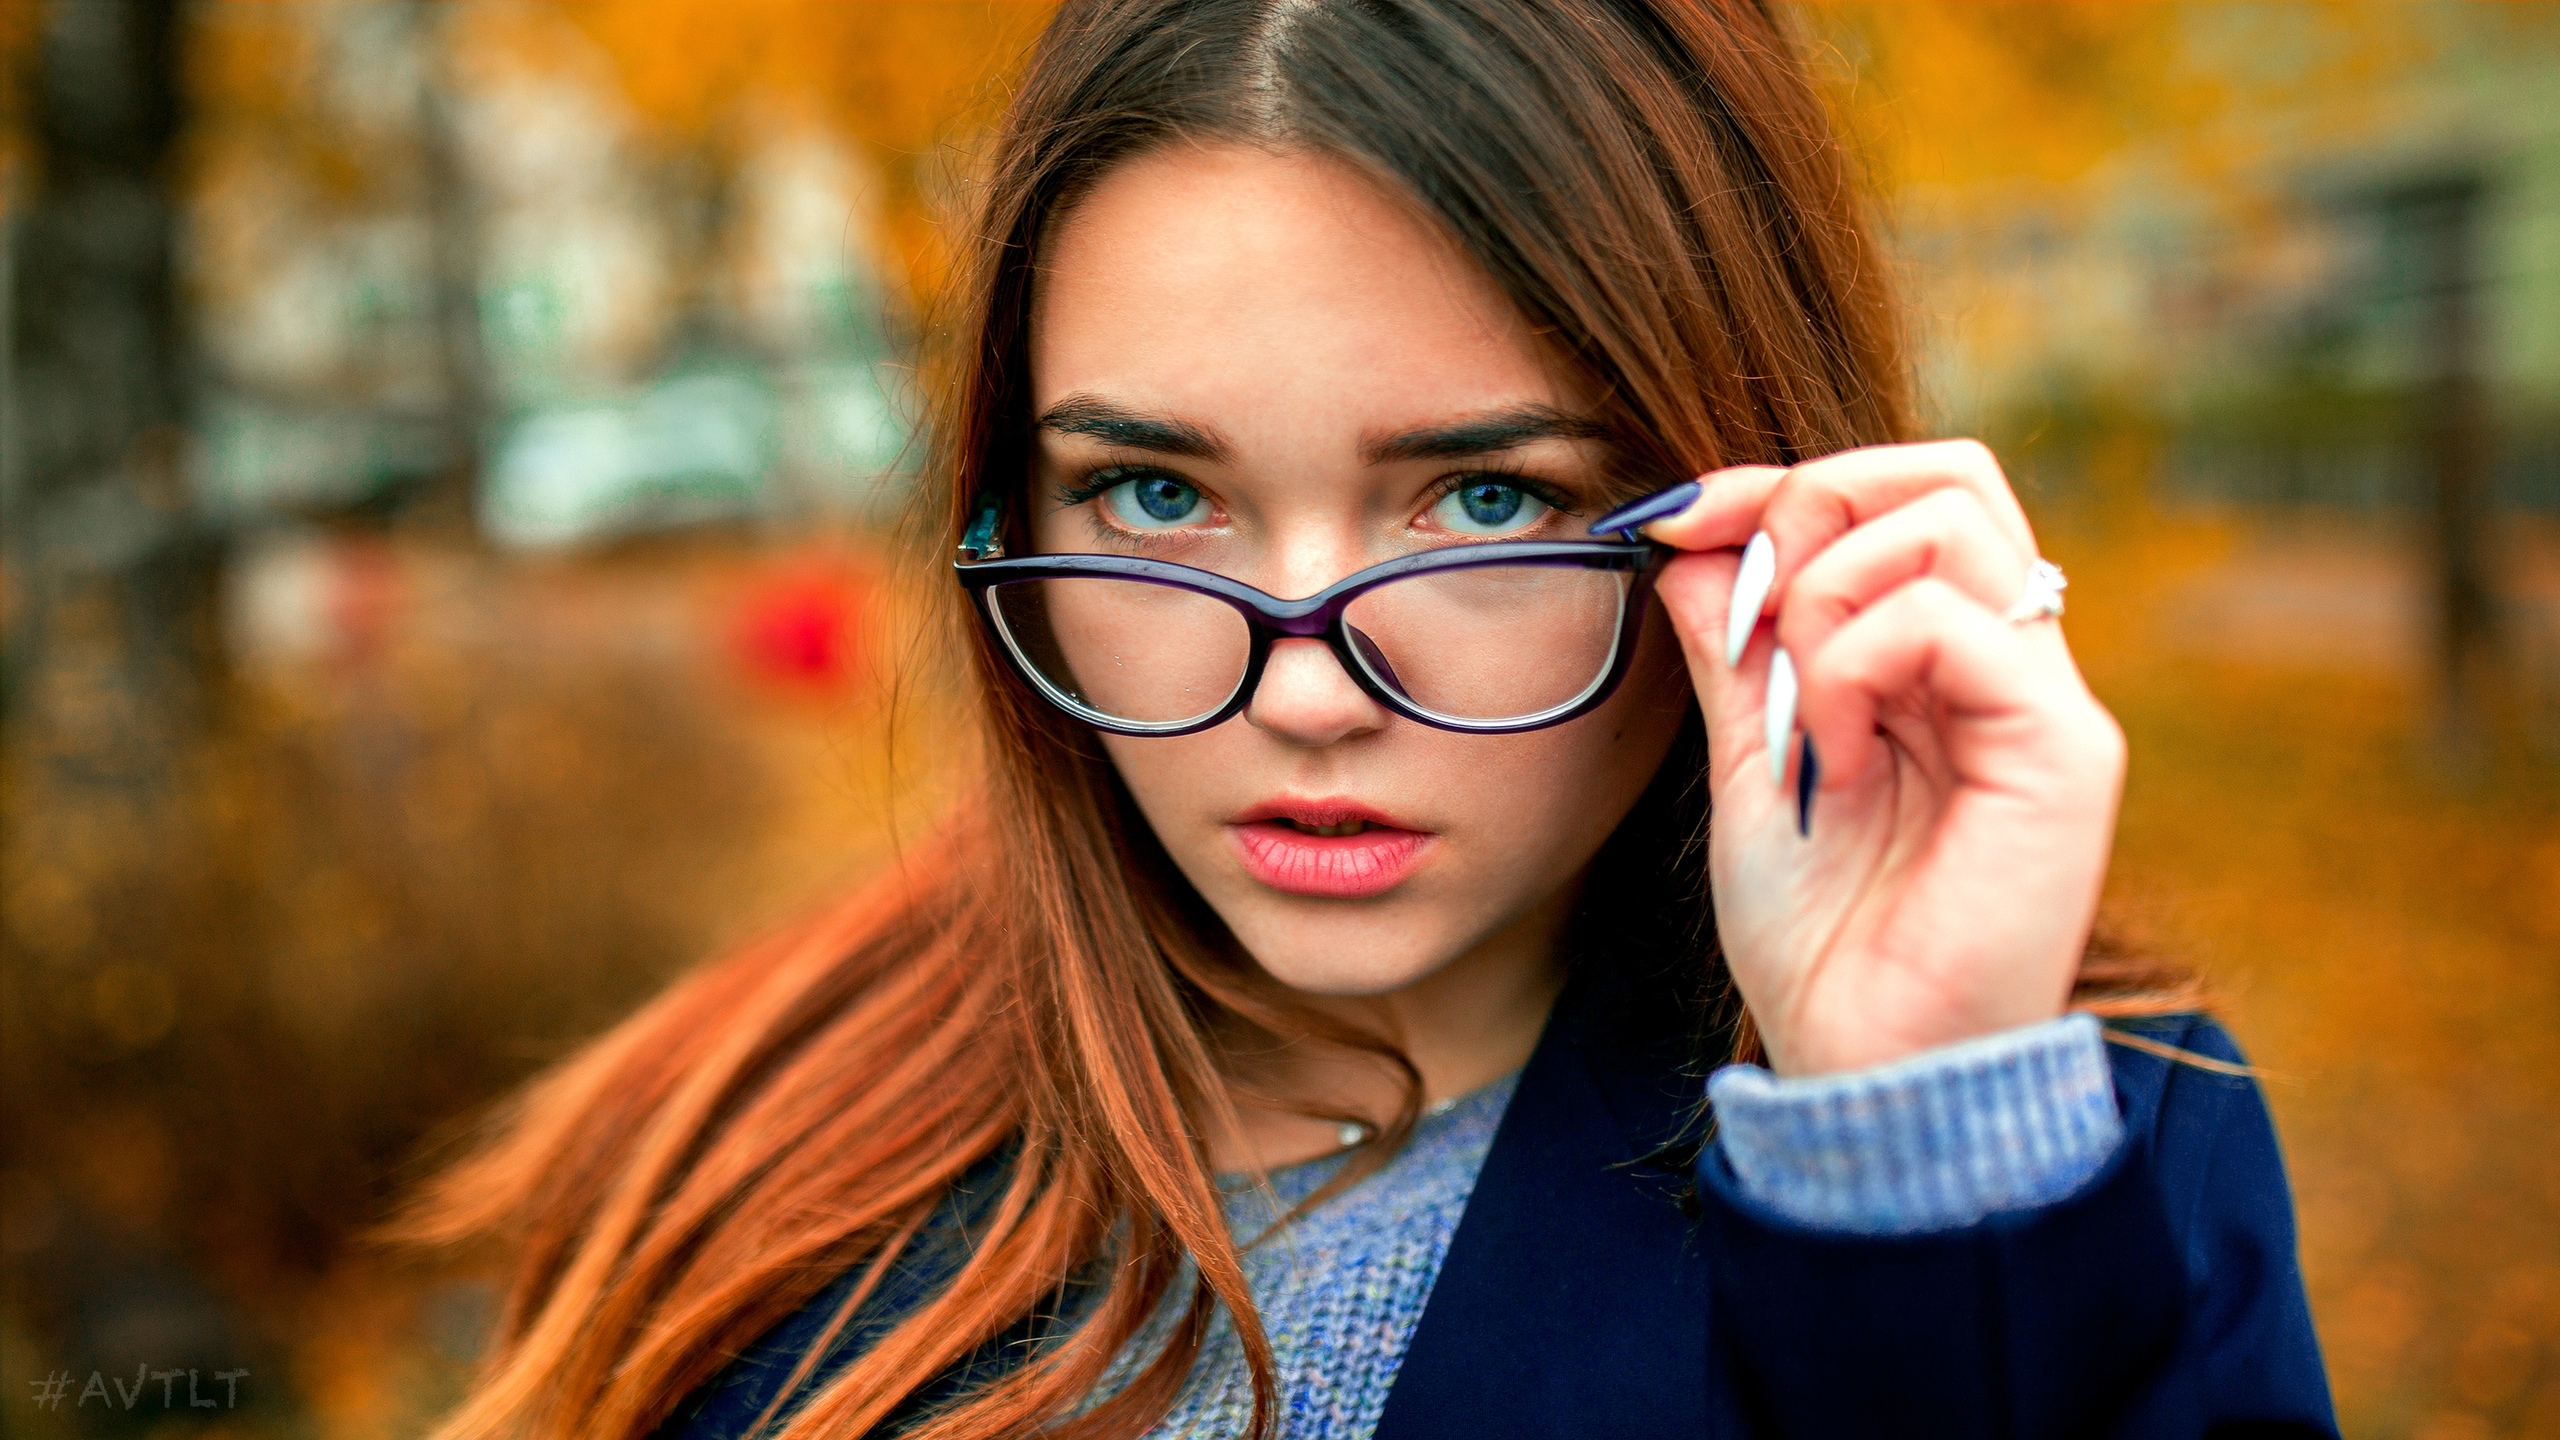 Women Model Brunette Portrait Photography Outdoors Looking At Viewer Women With Glasses Glasses Face 2560x1440